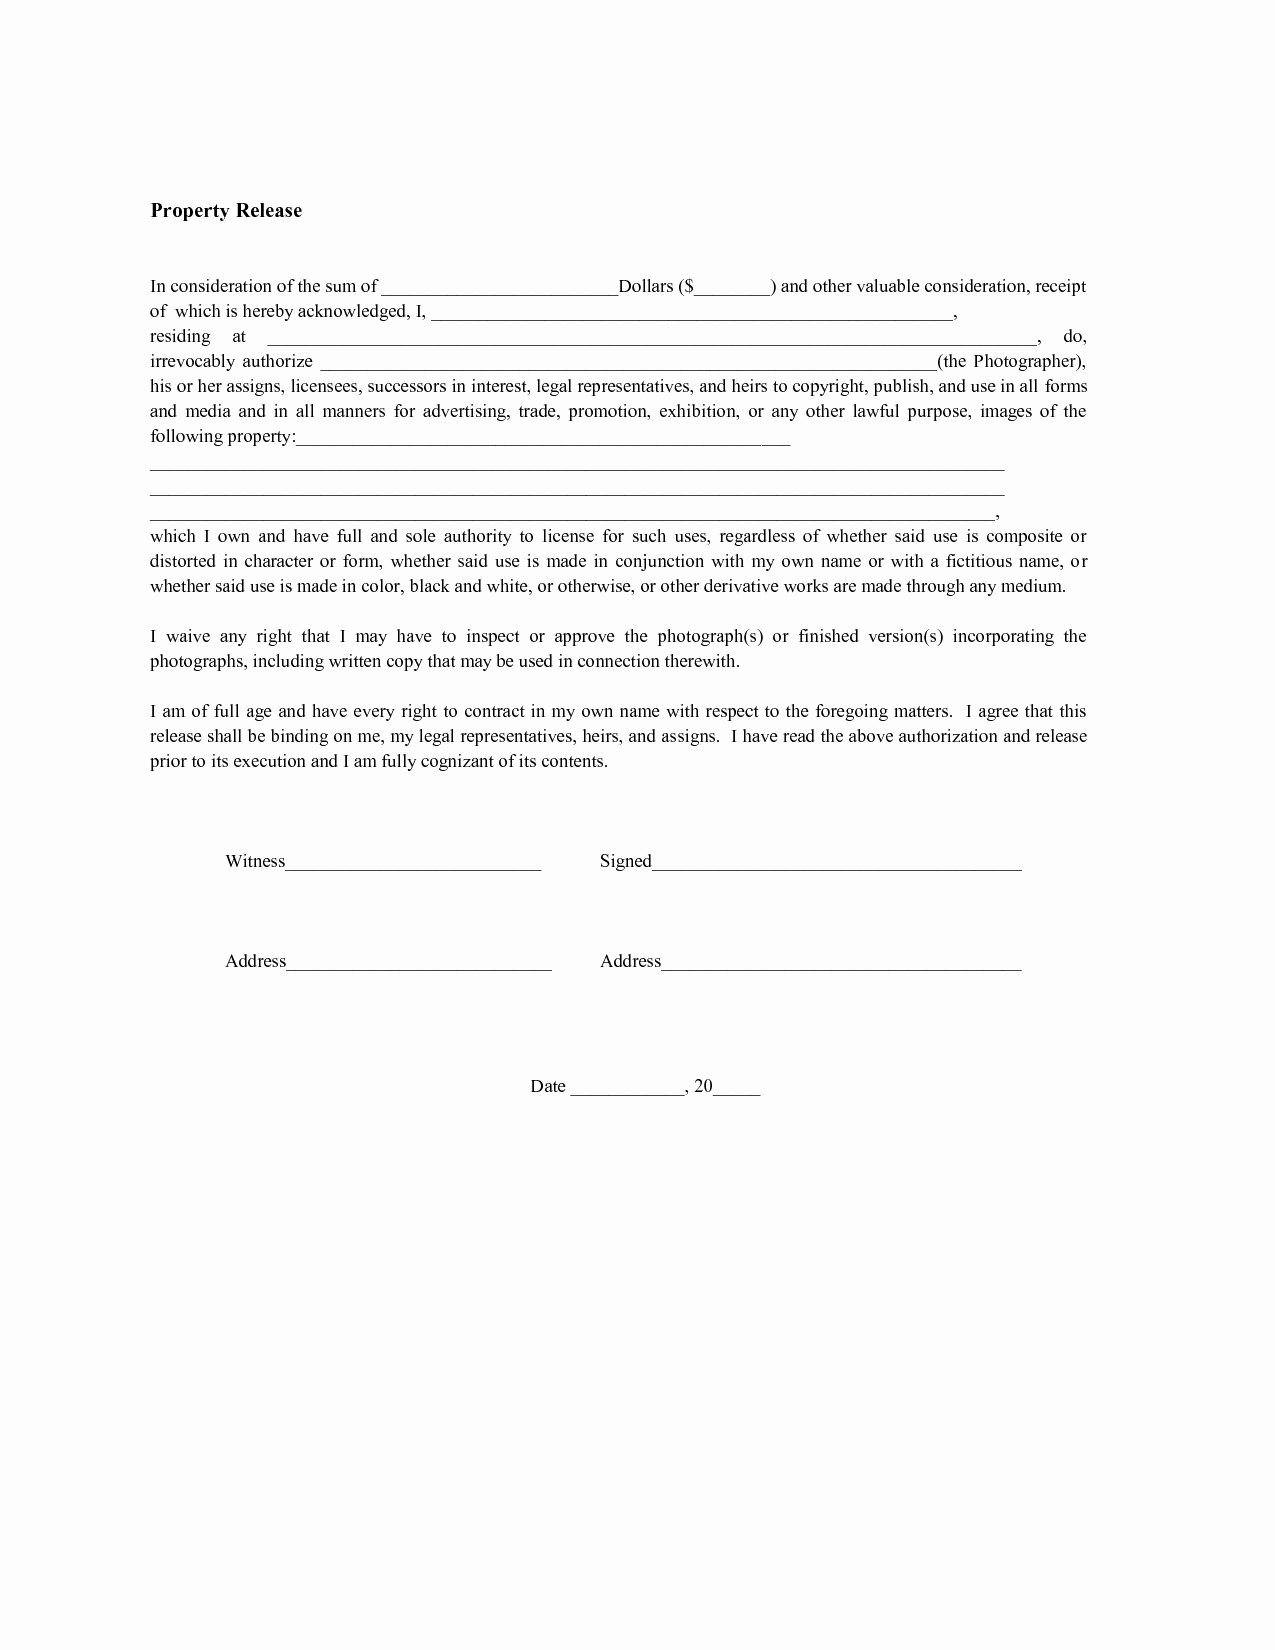 Personal Property Release form Template Best Of 29 Of Property Liability Release Template